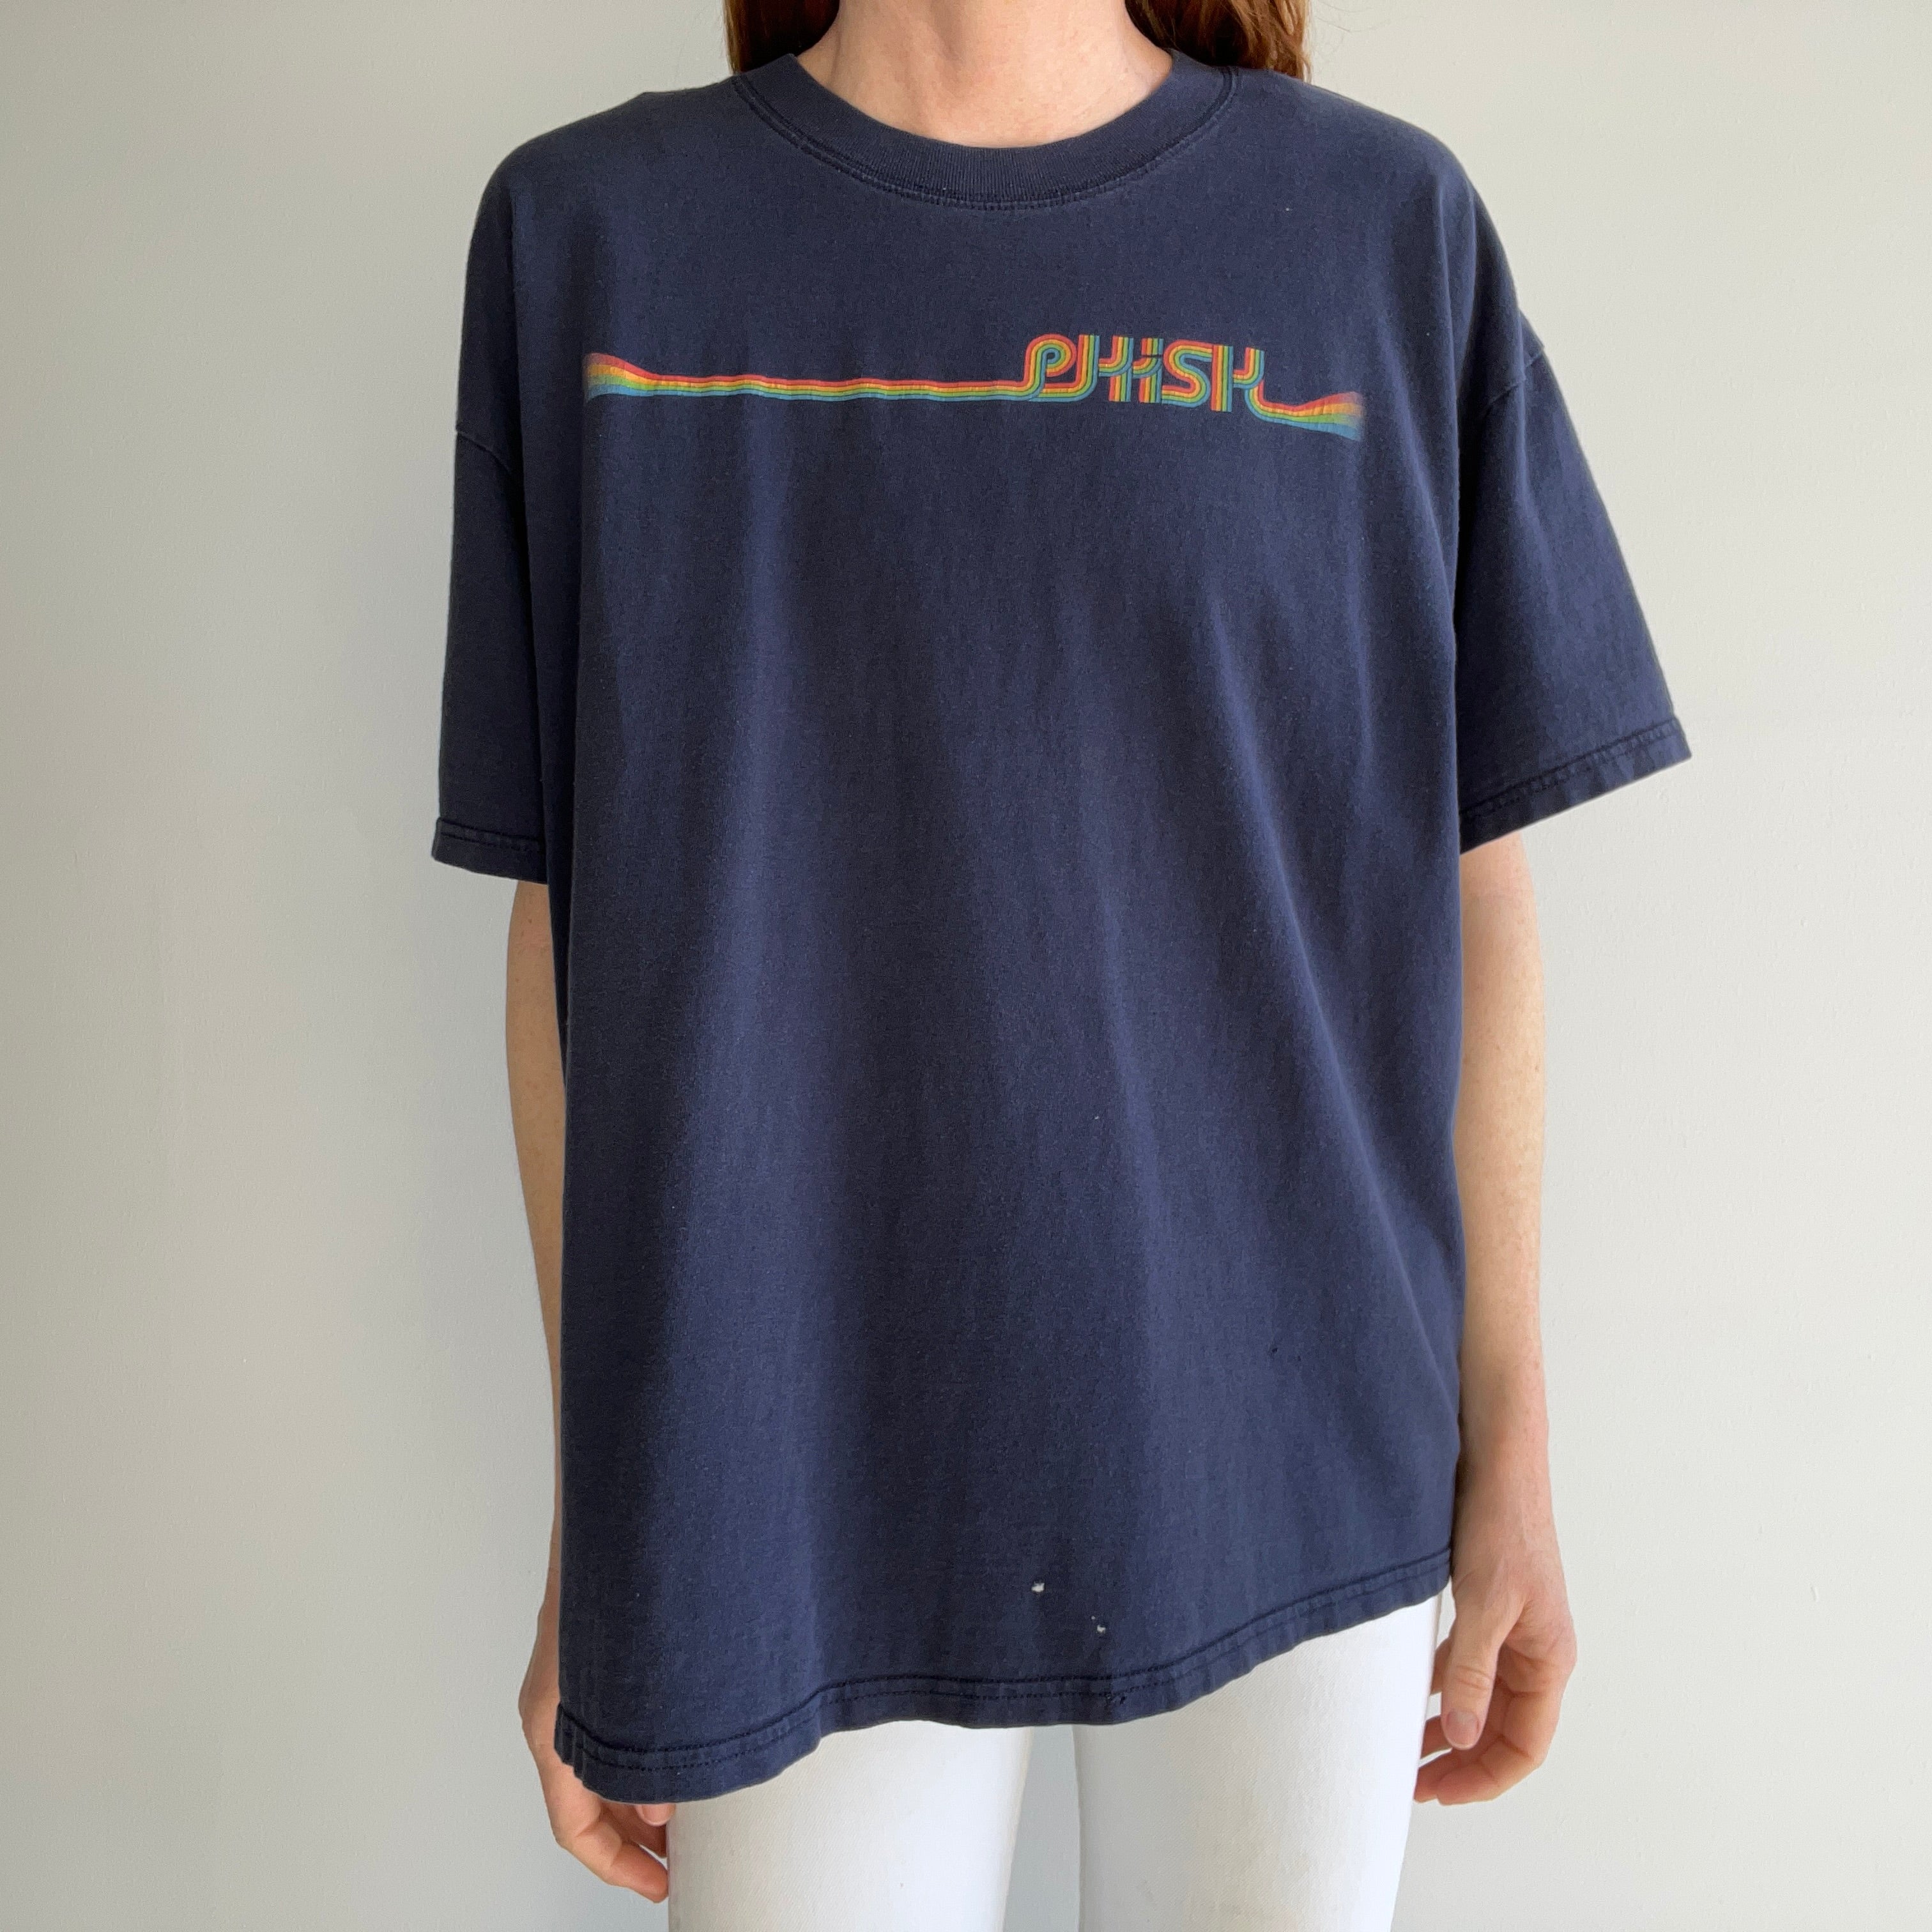 1998 Phish Shirt - Front and Back